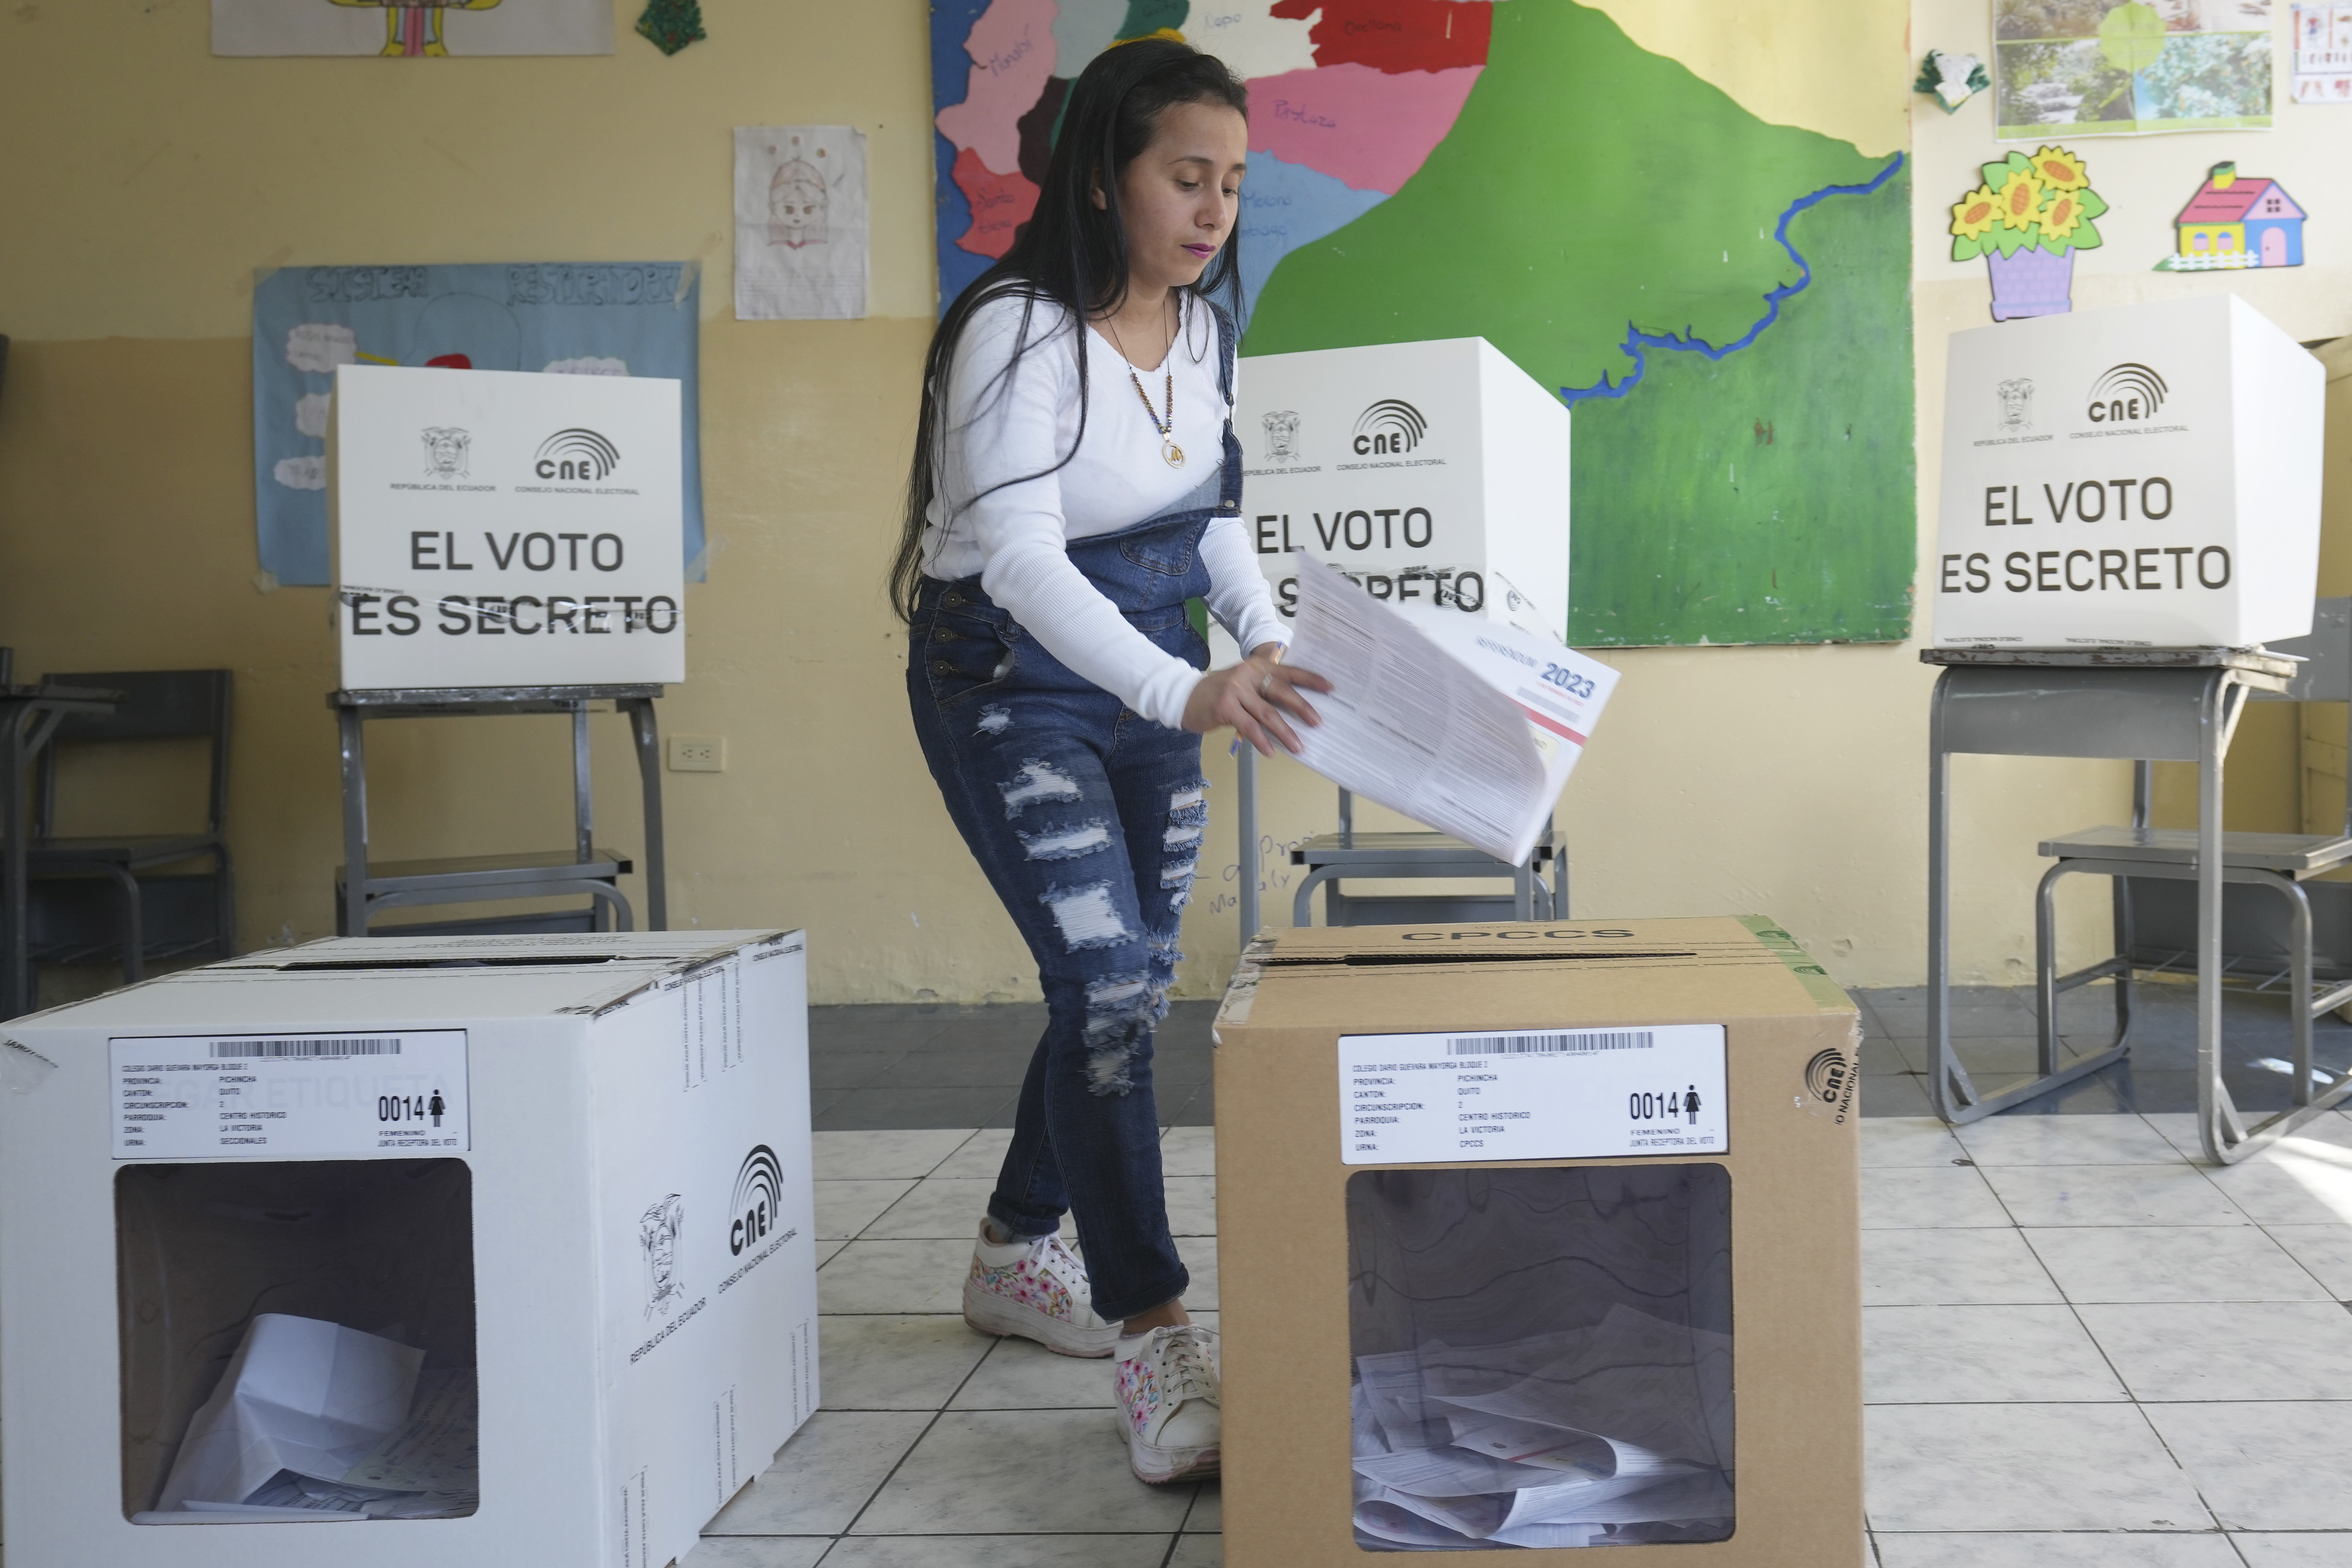 The activists and groups ask that the National Electoral Council respect a norm on parity in the formation of lists (AP Photo / Dolores Ochoa)